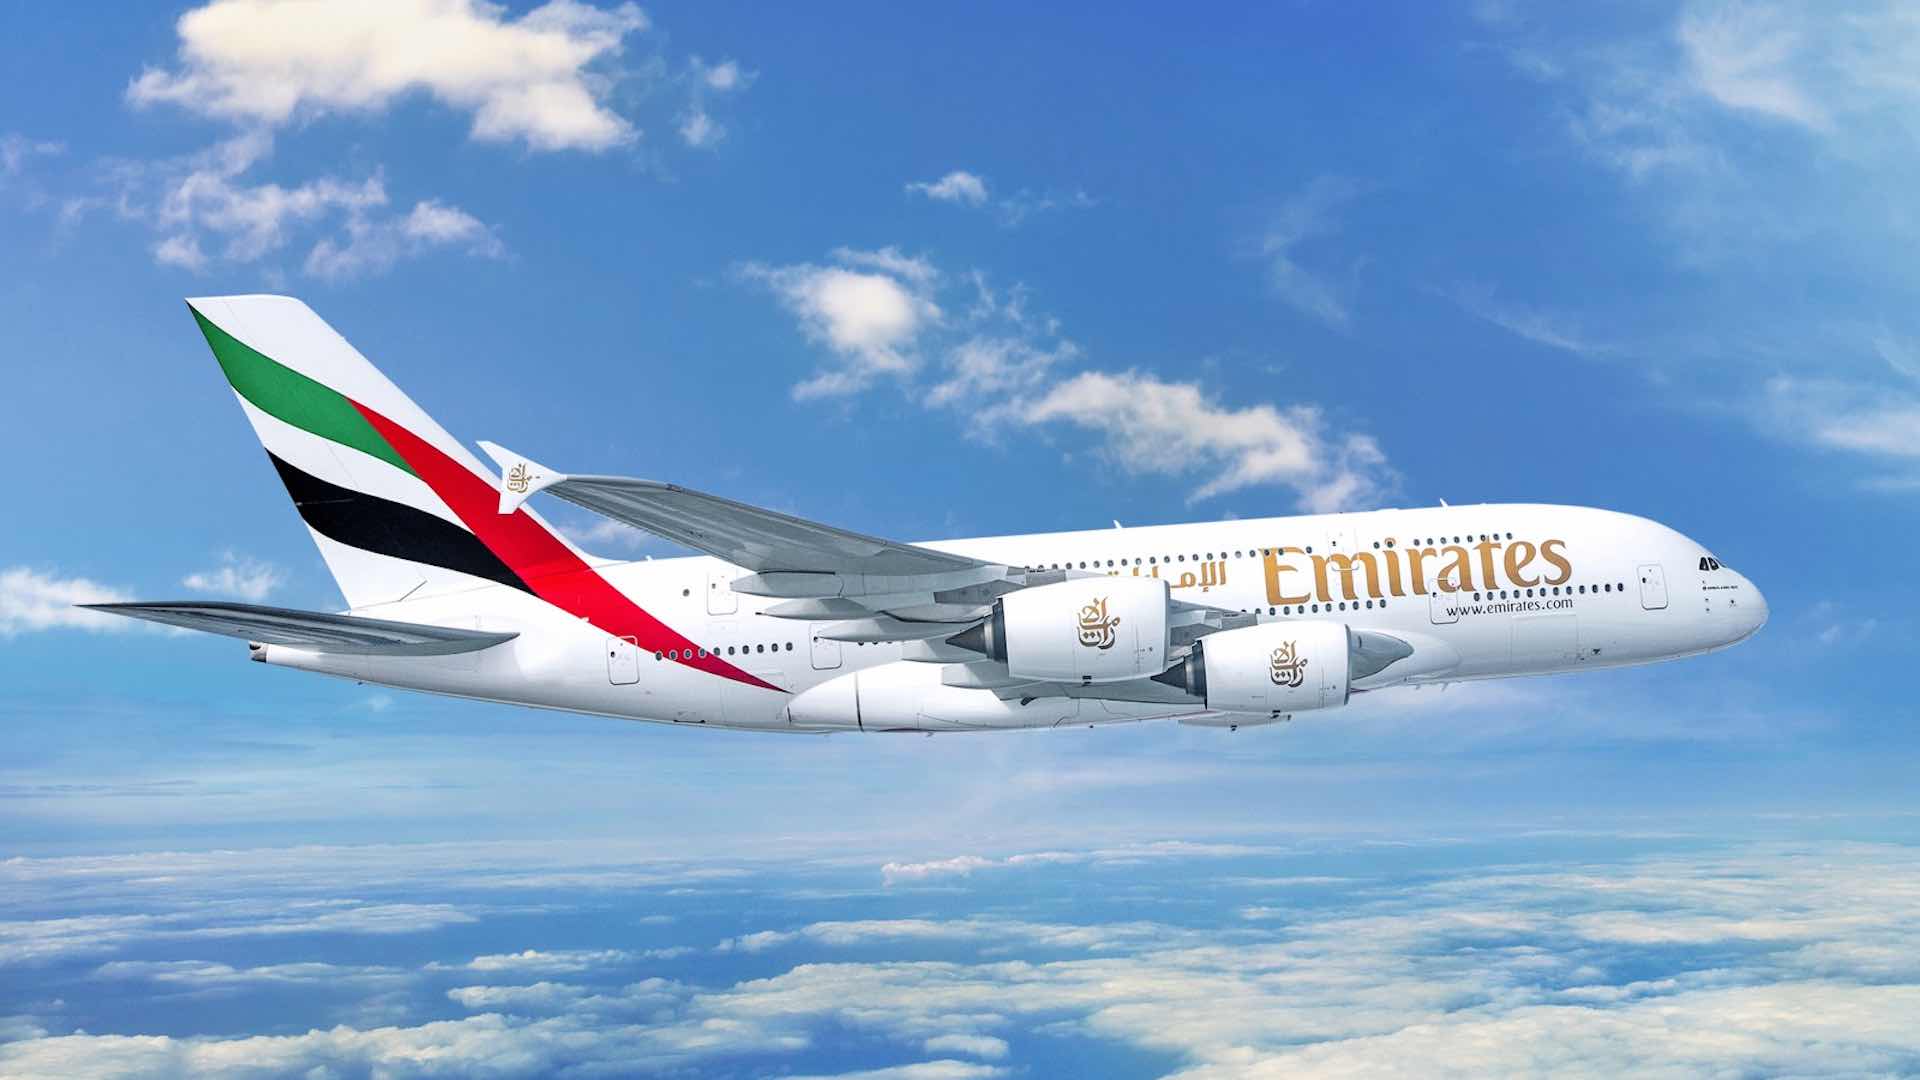 First A380 service to Bali to be launched by Emirates